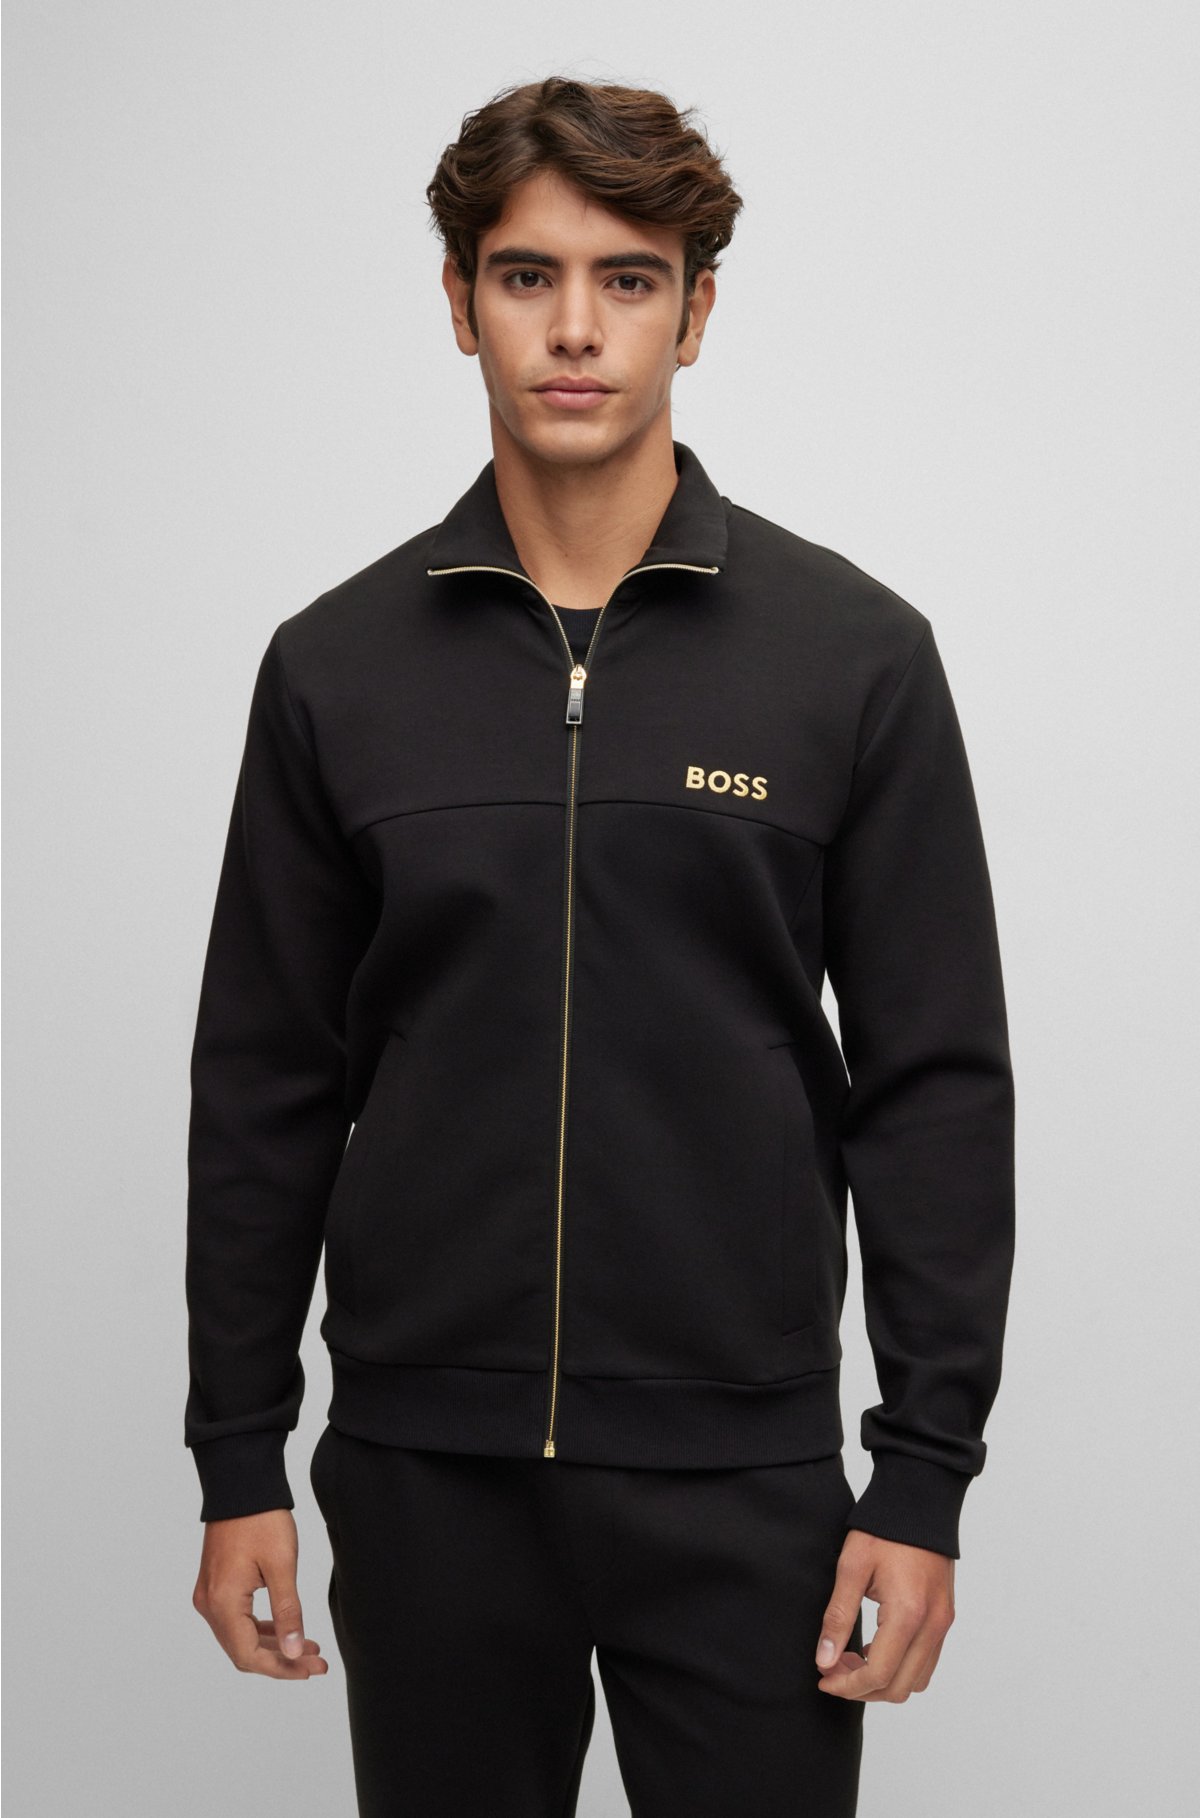 Embroidered Signature Cotton Hoodie - Men - Ready-to-Wear